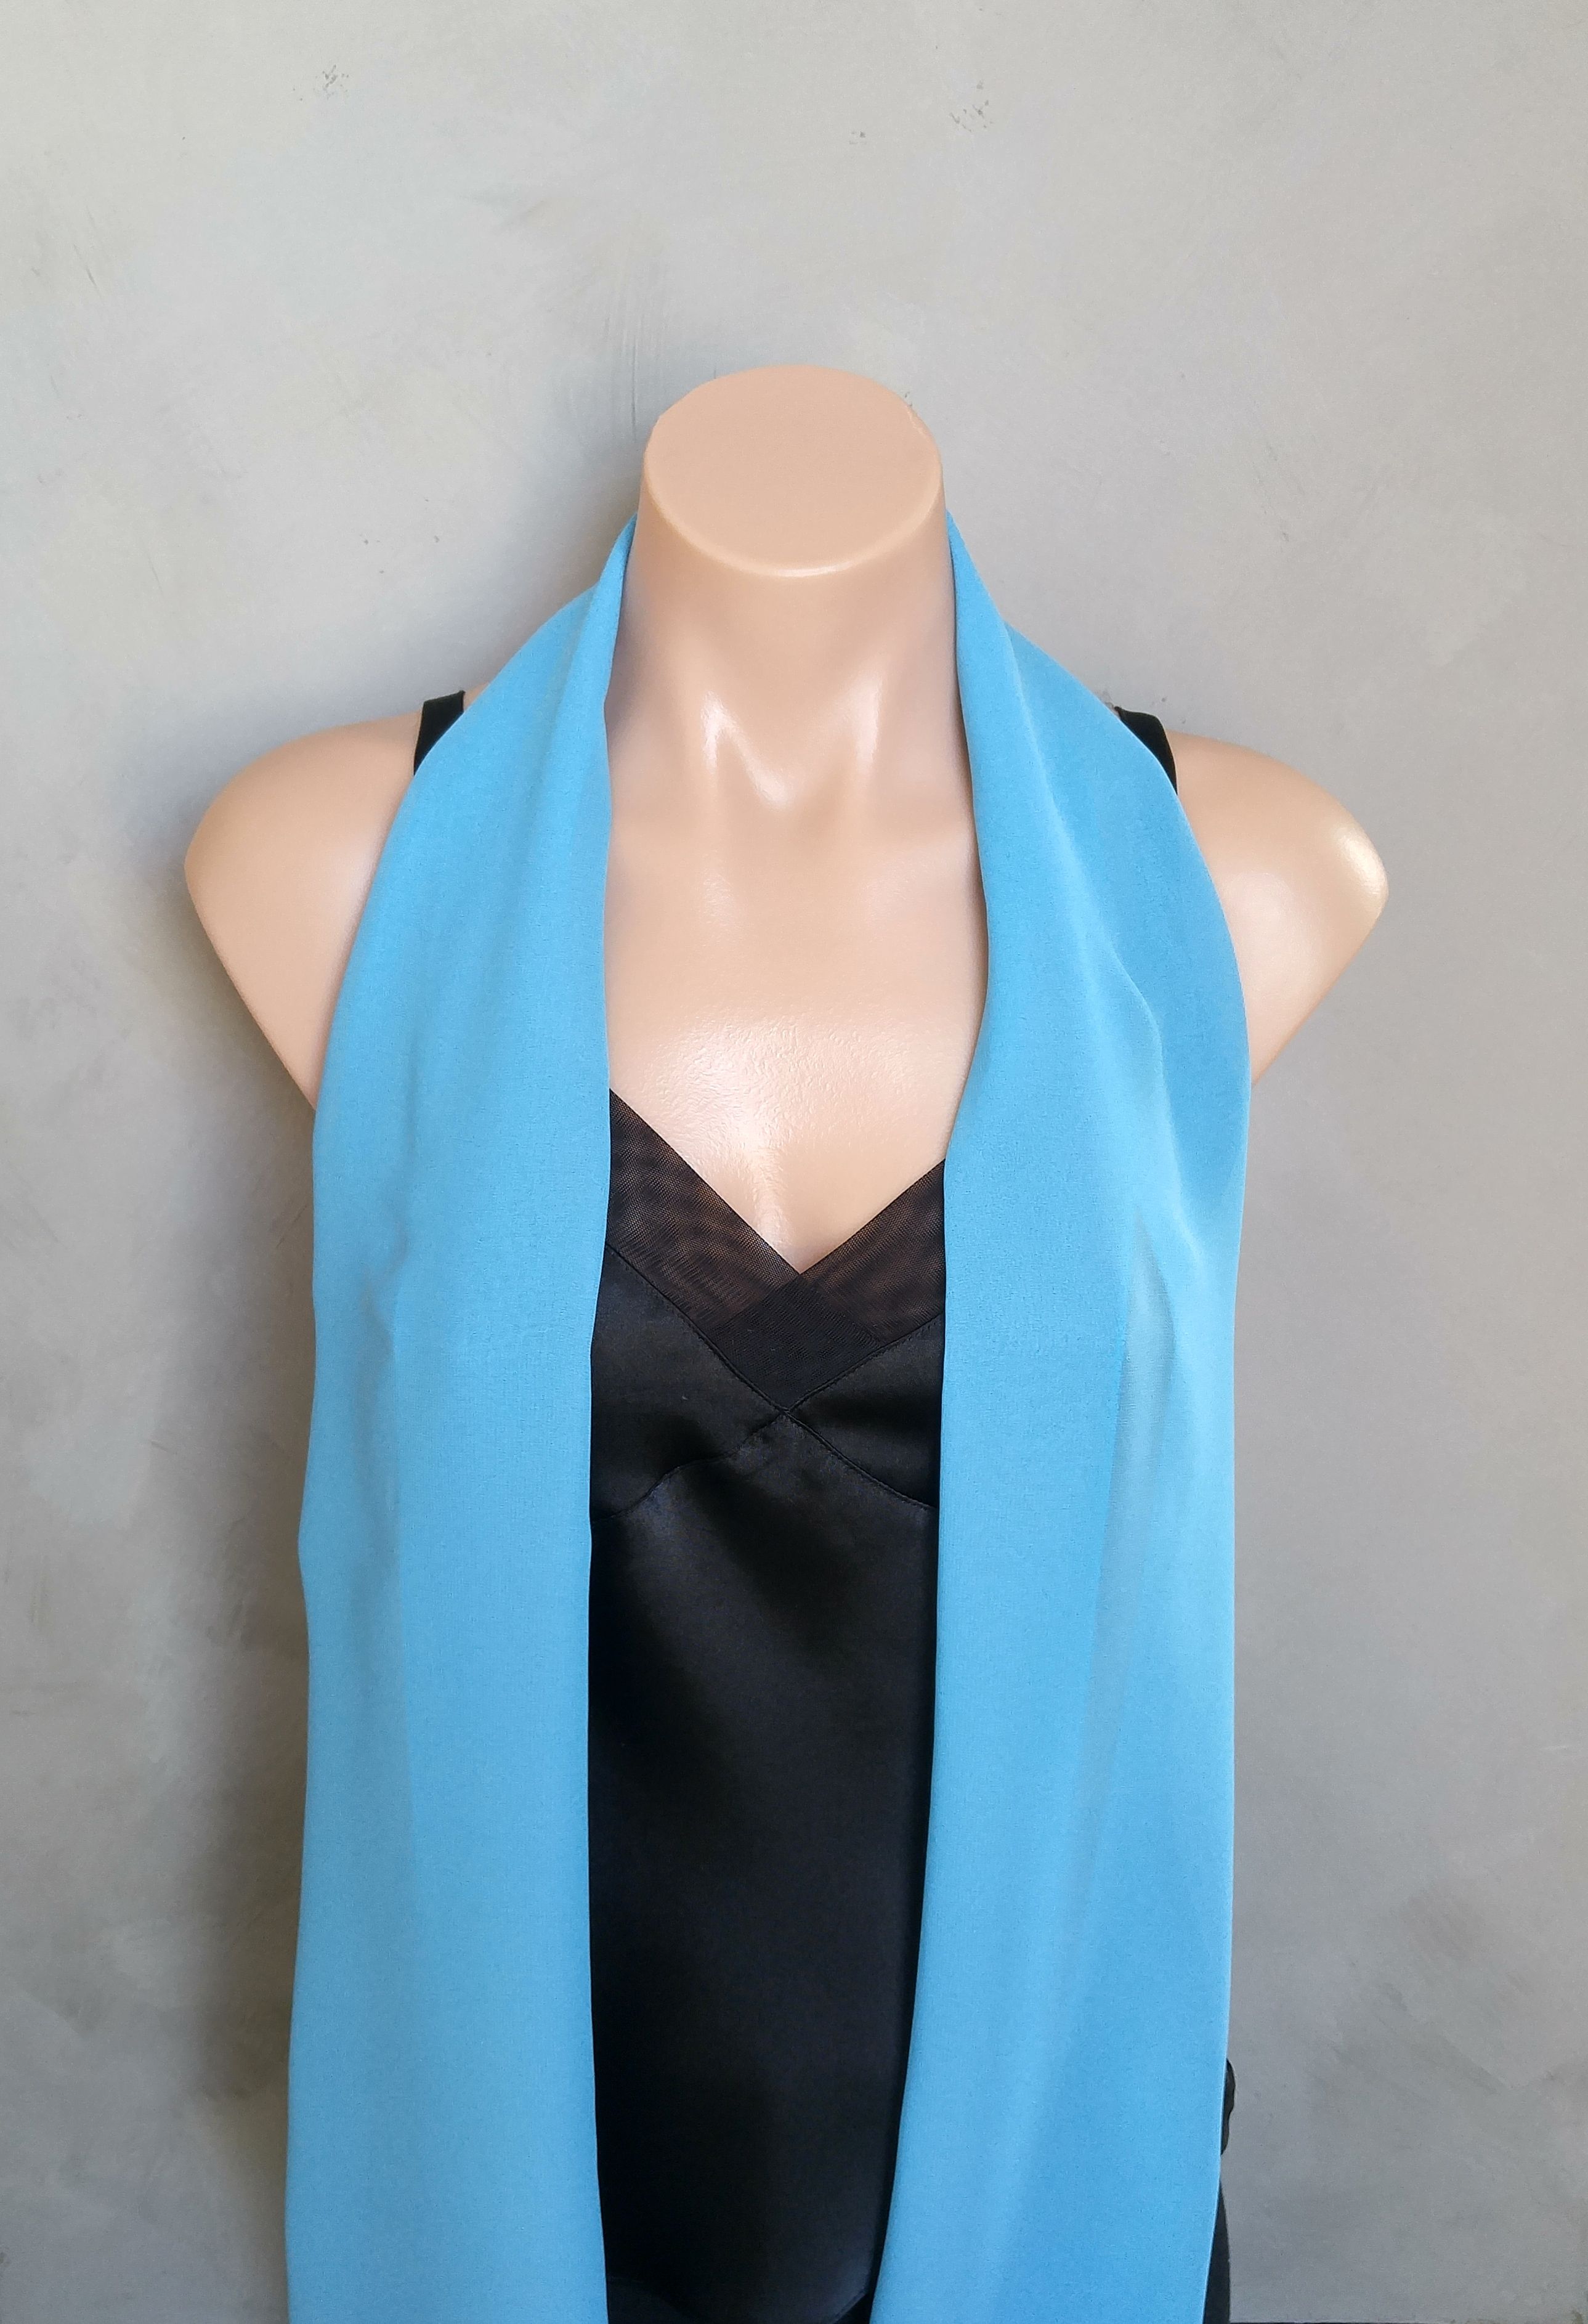 Buy Custom Crystal Blue Chiffon Scarf Made To Order From All Seasons